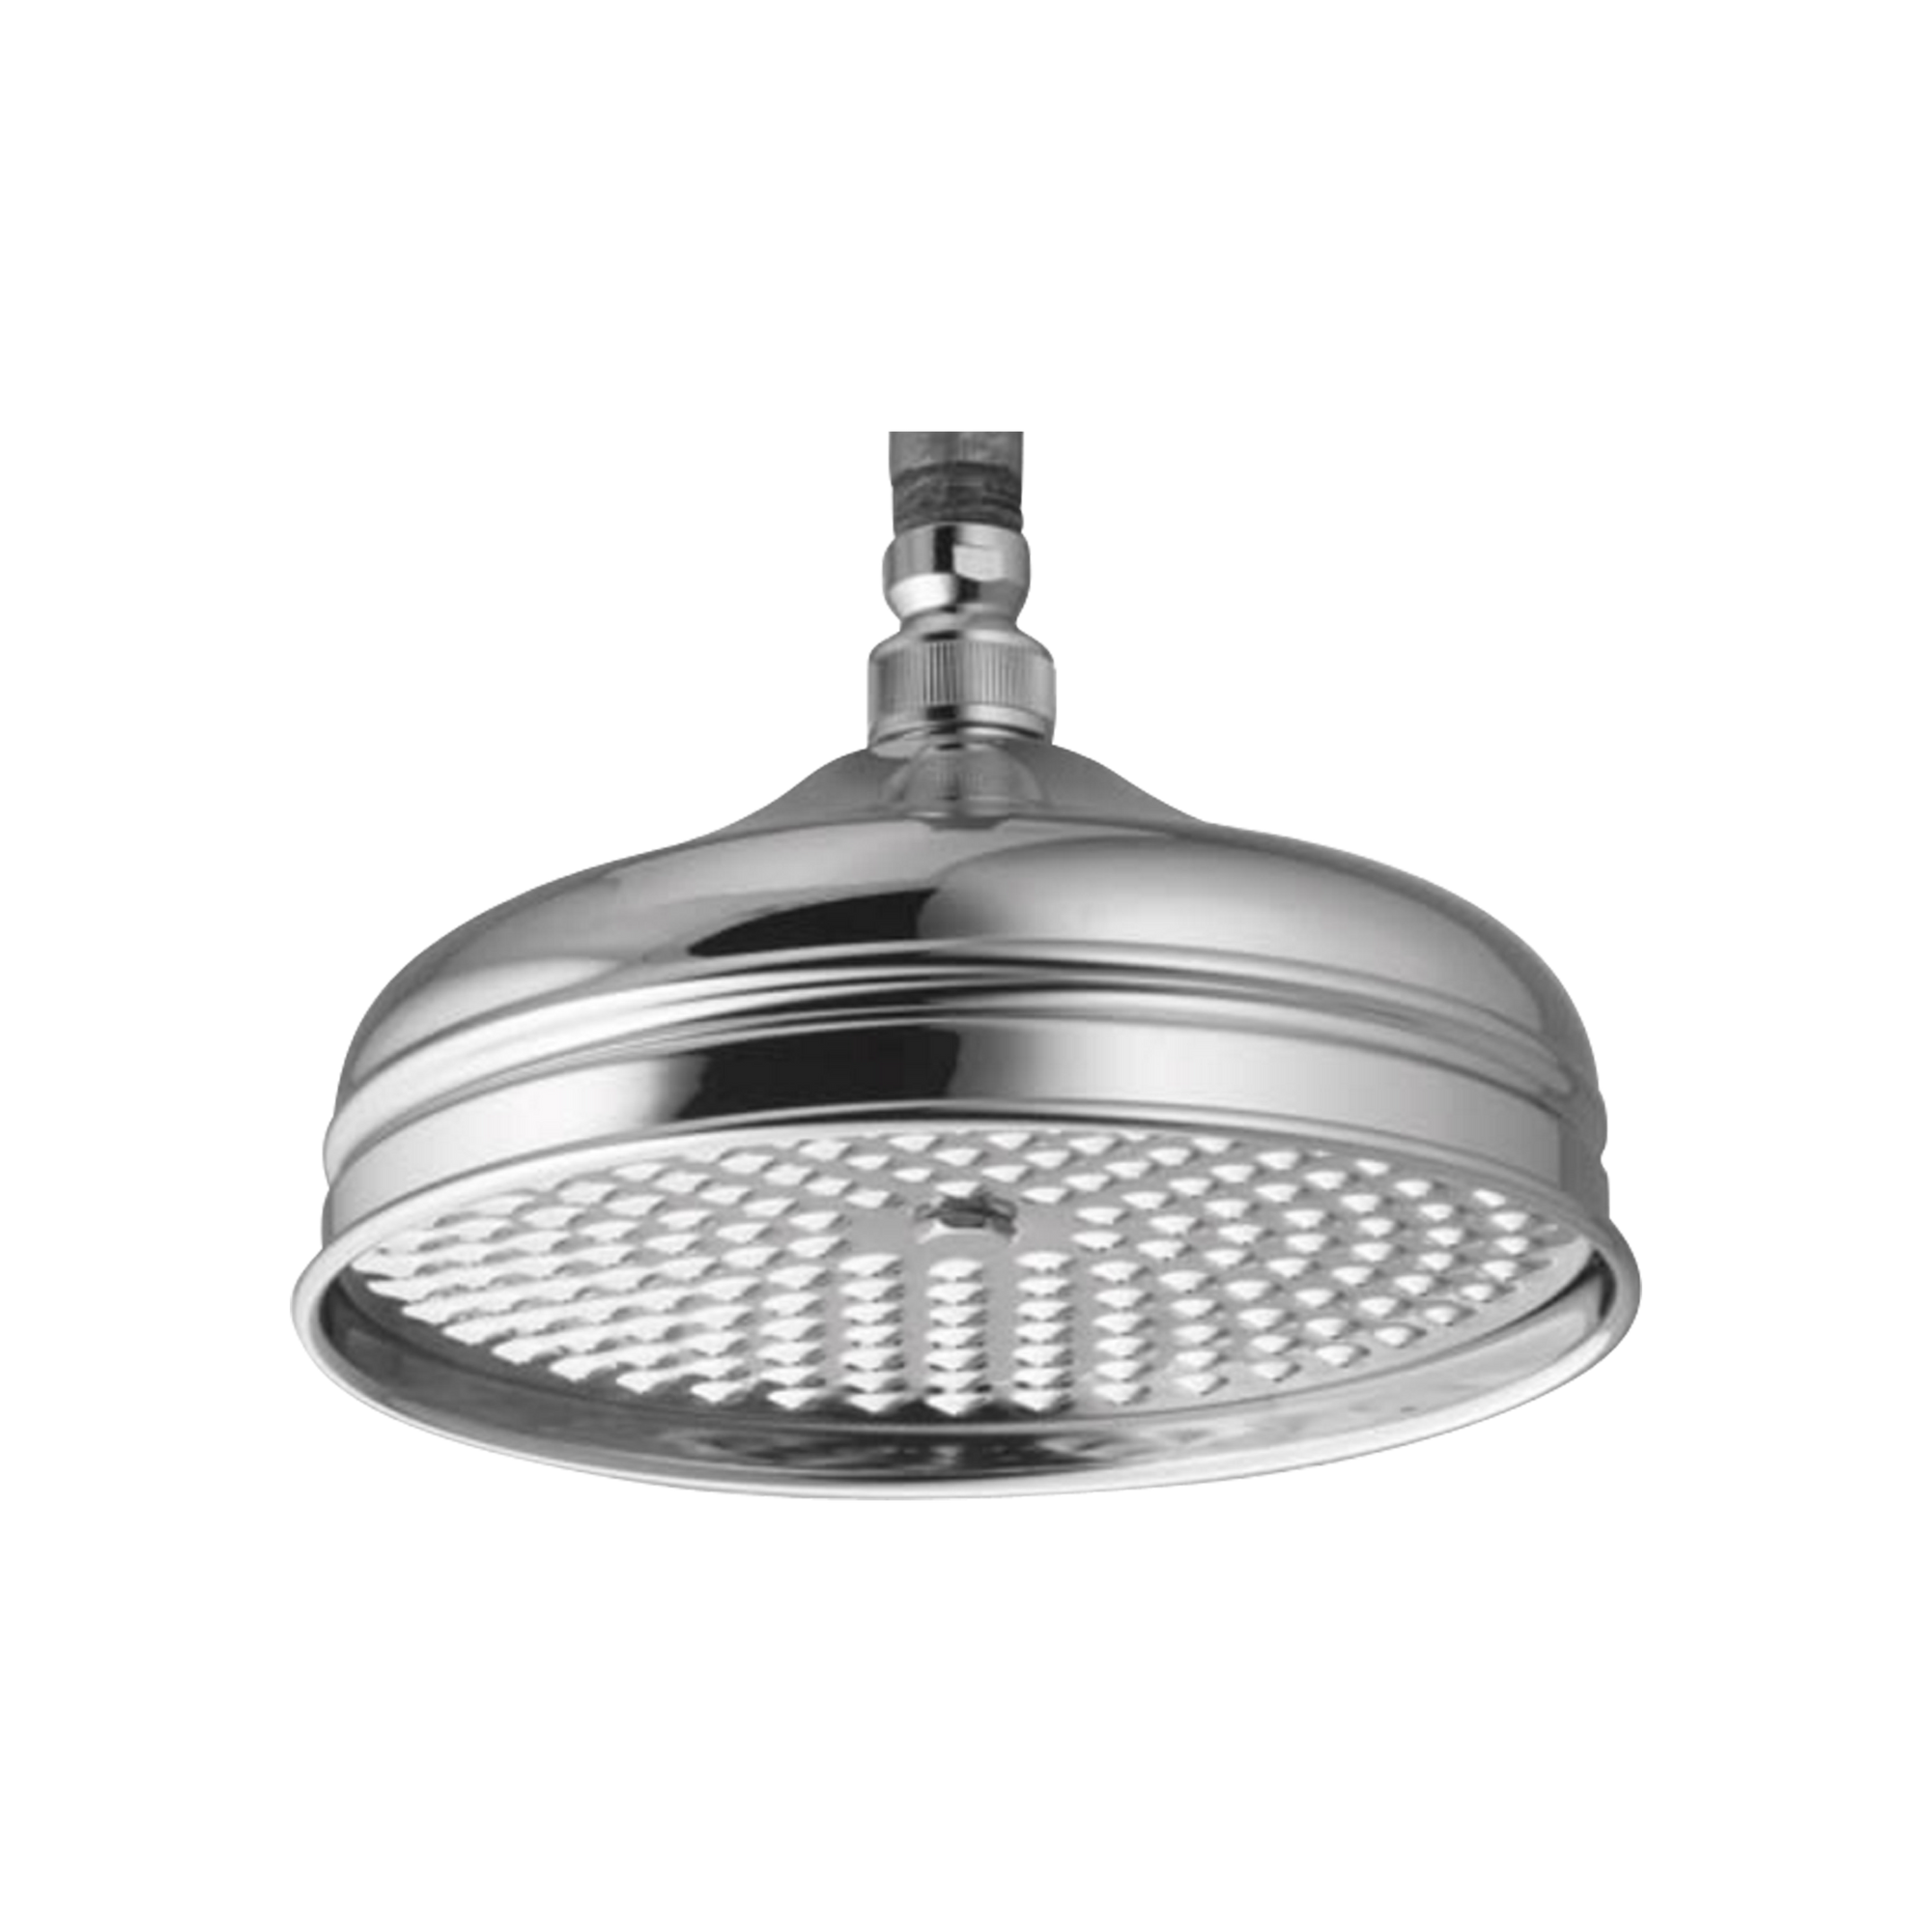 A traditional and contemporary rain shower head.